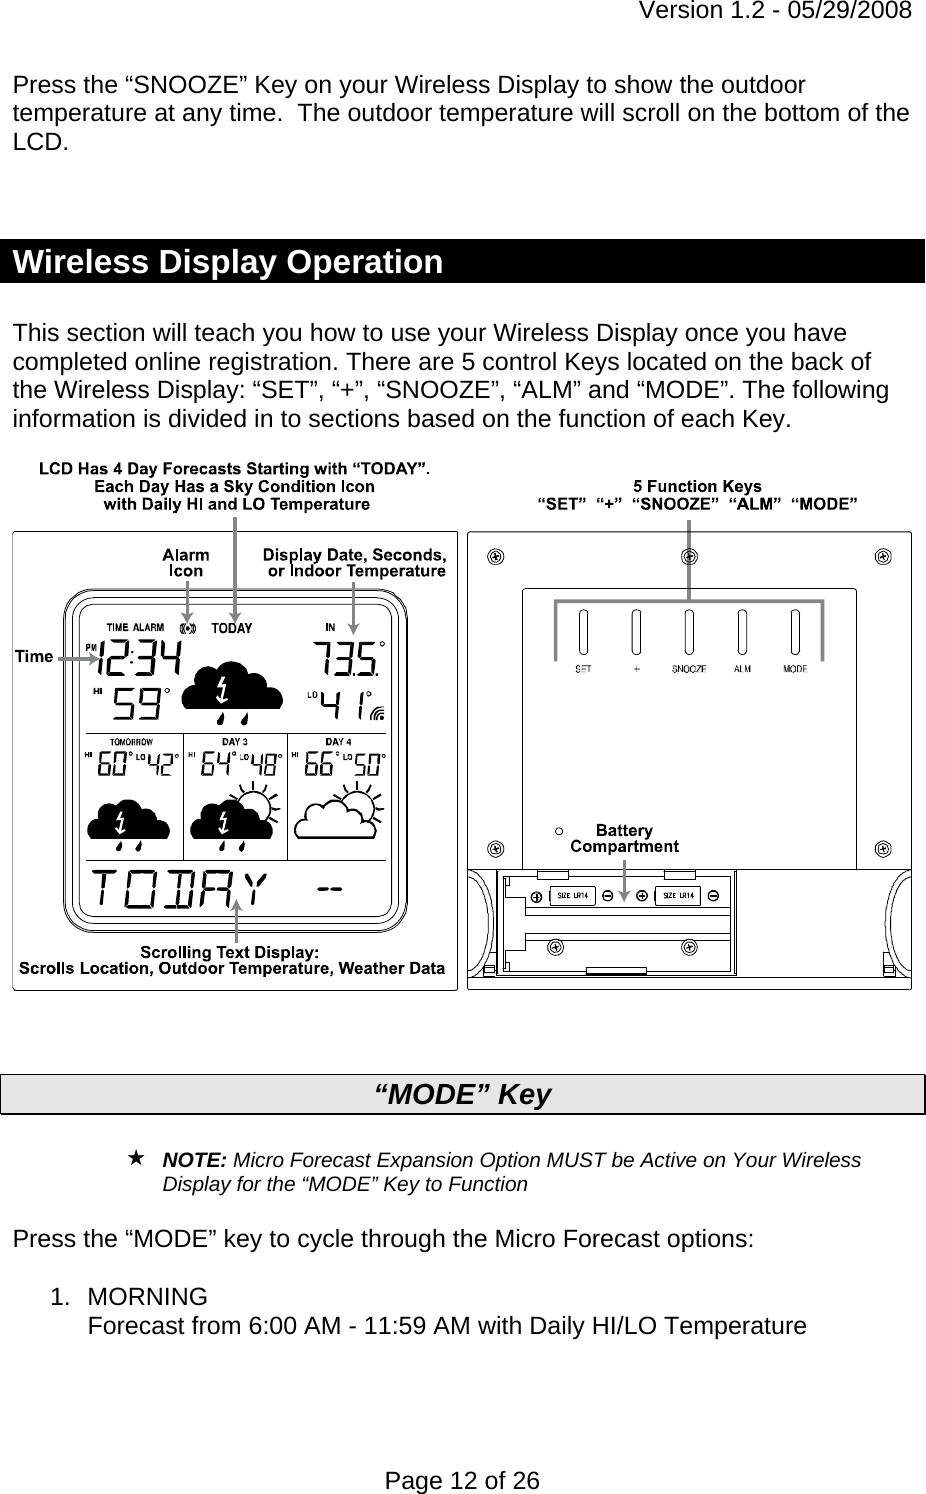 Version 1.2 - 05/29/2008 Page 12 of 26 Press the “SNOOZE” Key on your Wireless Display to show the outdoor temperature at any time.  The outdoor temperature will scroll on the bottom of the LCD.   Wireless Display Operation  This section will teach you how to use your Wireless Display once you have completed online registration. There are 5 control Keys located on the back of the Wireless Display: “SET”, “+”, “SNOOZE”, “ALM” and “MODE”. The following information is divided in to sections based on the function of each Key.     “MODE” Key   NOTE: Micro Forecast Expansion Option MUST be Active on Your Wireless Display for the “MODE” Key to Function  Press the “MODE” key to cycle through the Micro Forecast options:  1. MORNING  Forecast from 6:00 AM - 11:59 AM with Daily HI/LO Temperature  